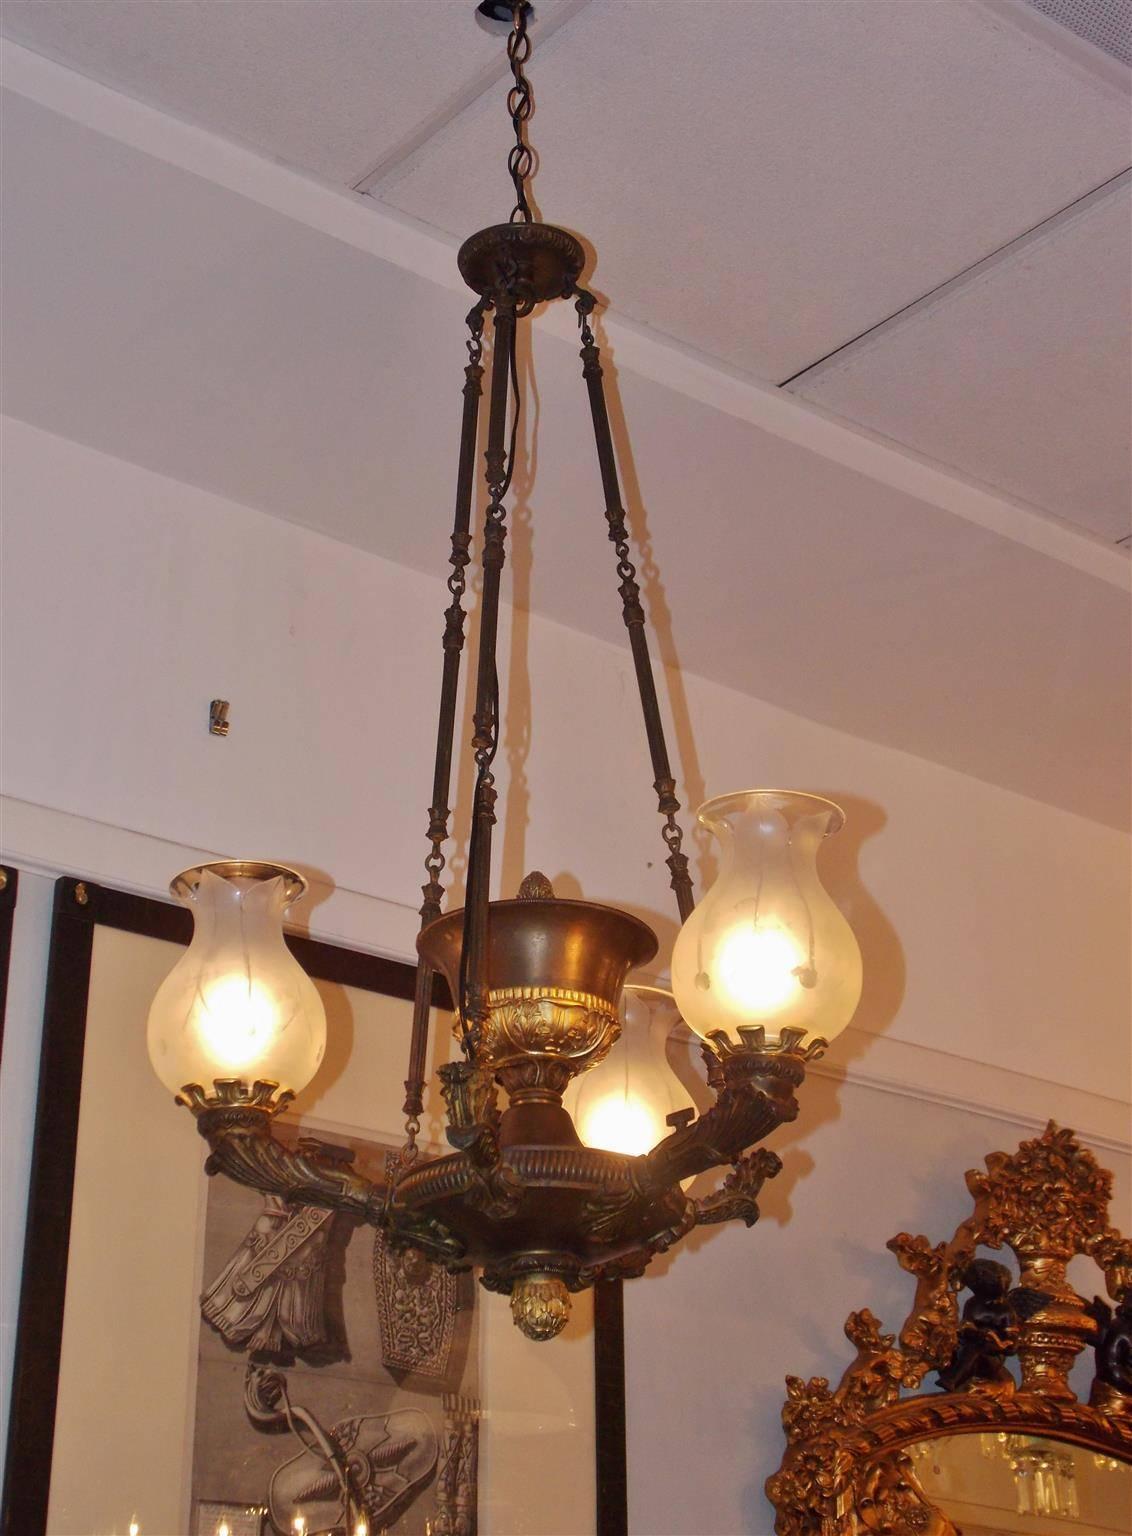 French gilt bronze three-arm argand chandelier with centered urn reservoir, original keys, original bulbous frosted etched globes, and filigree floral motif. Chandelier was originally gas and has been electrified, Early 19th Century.